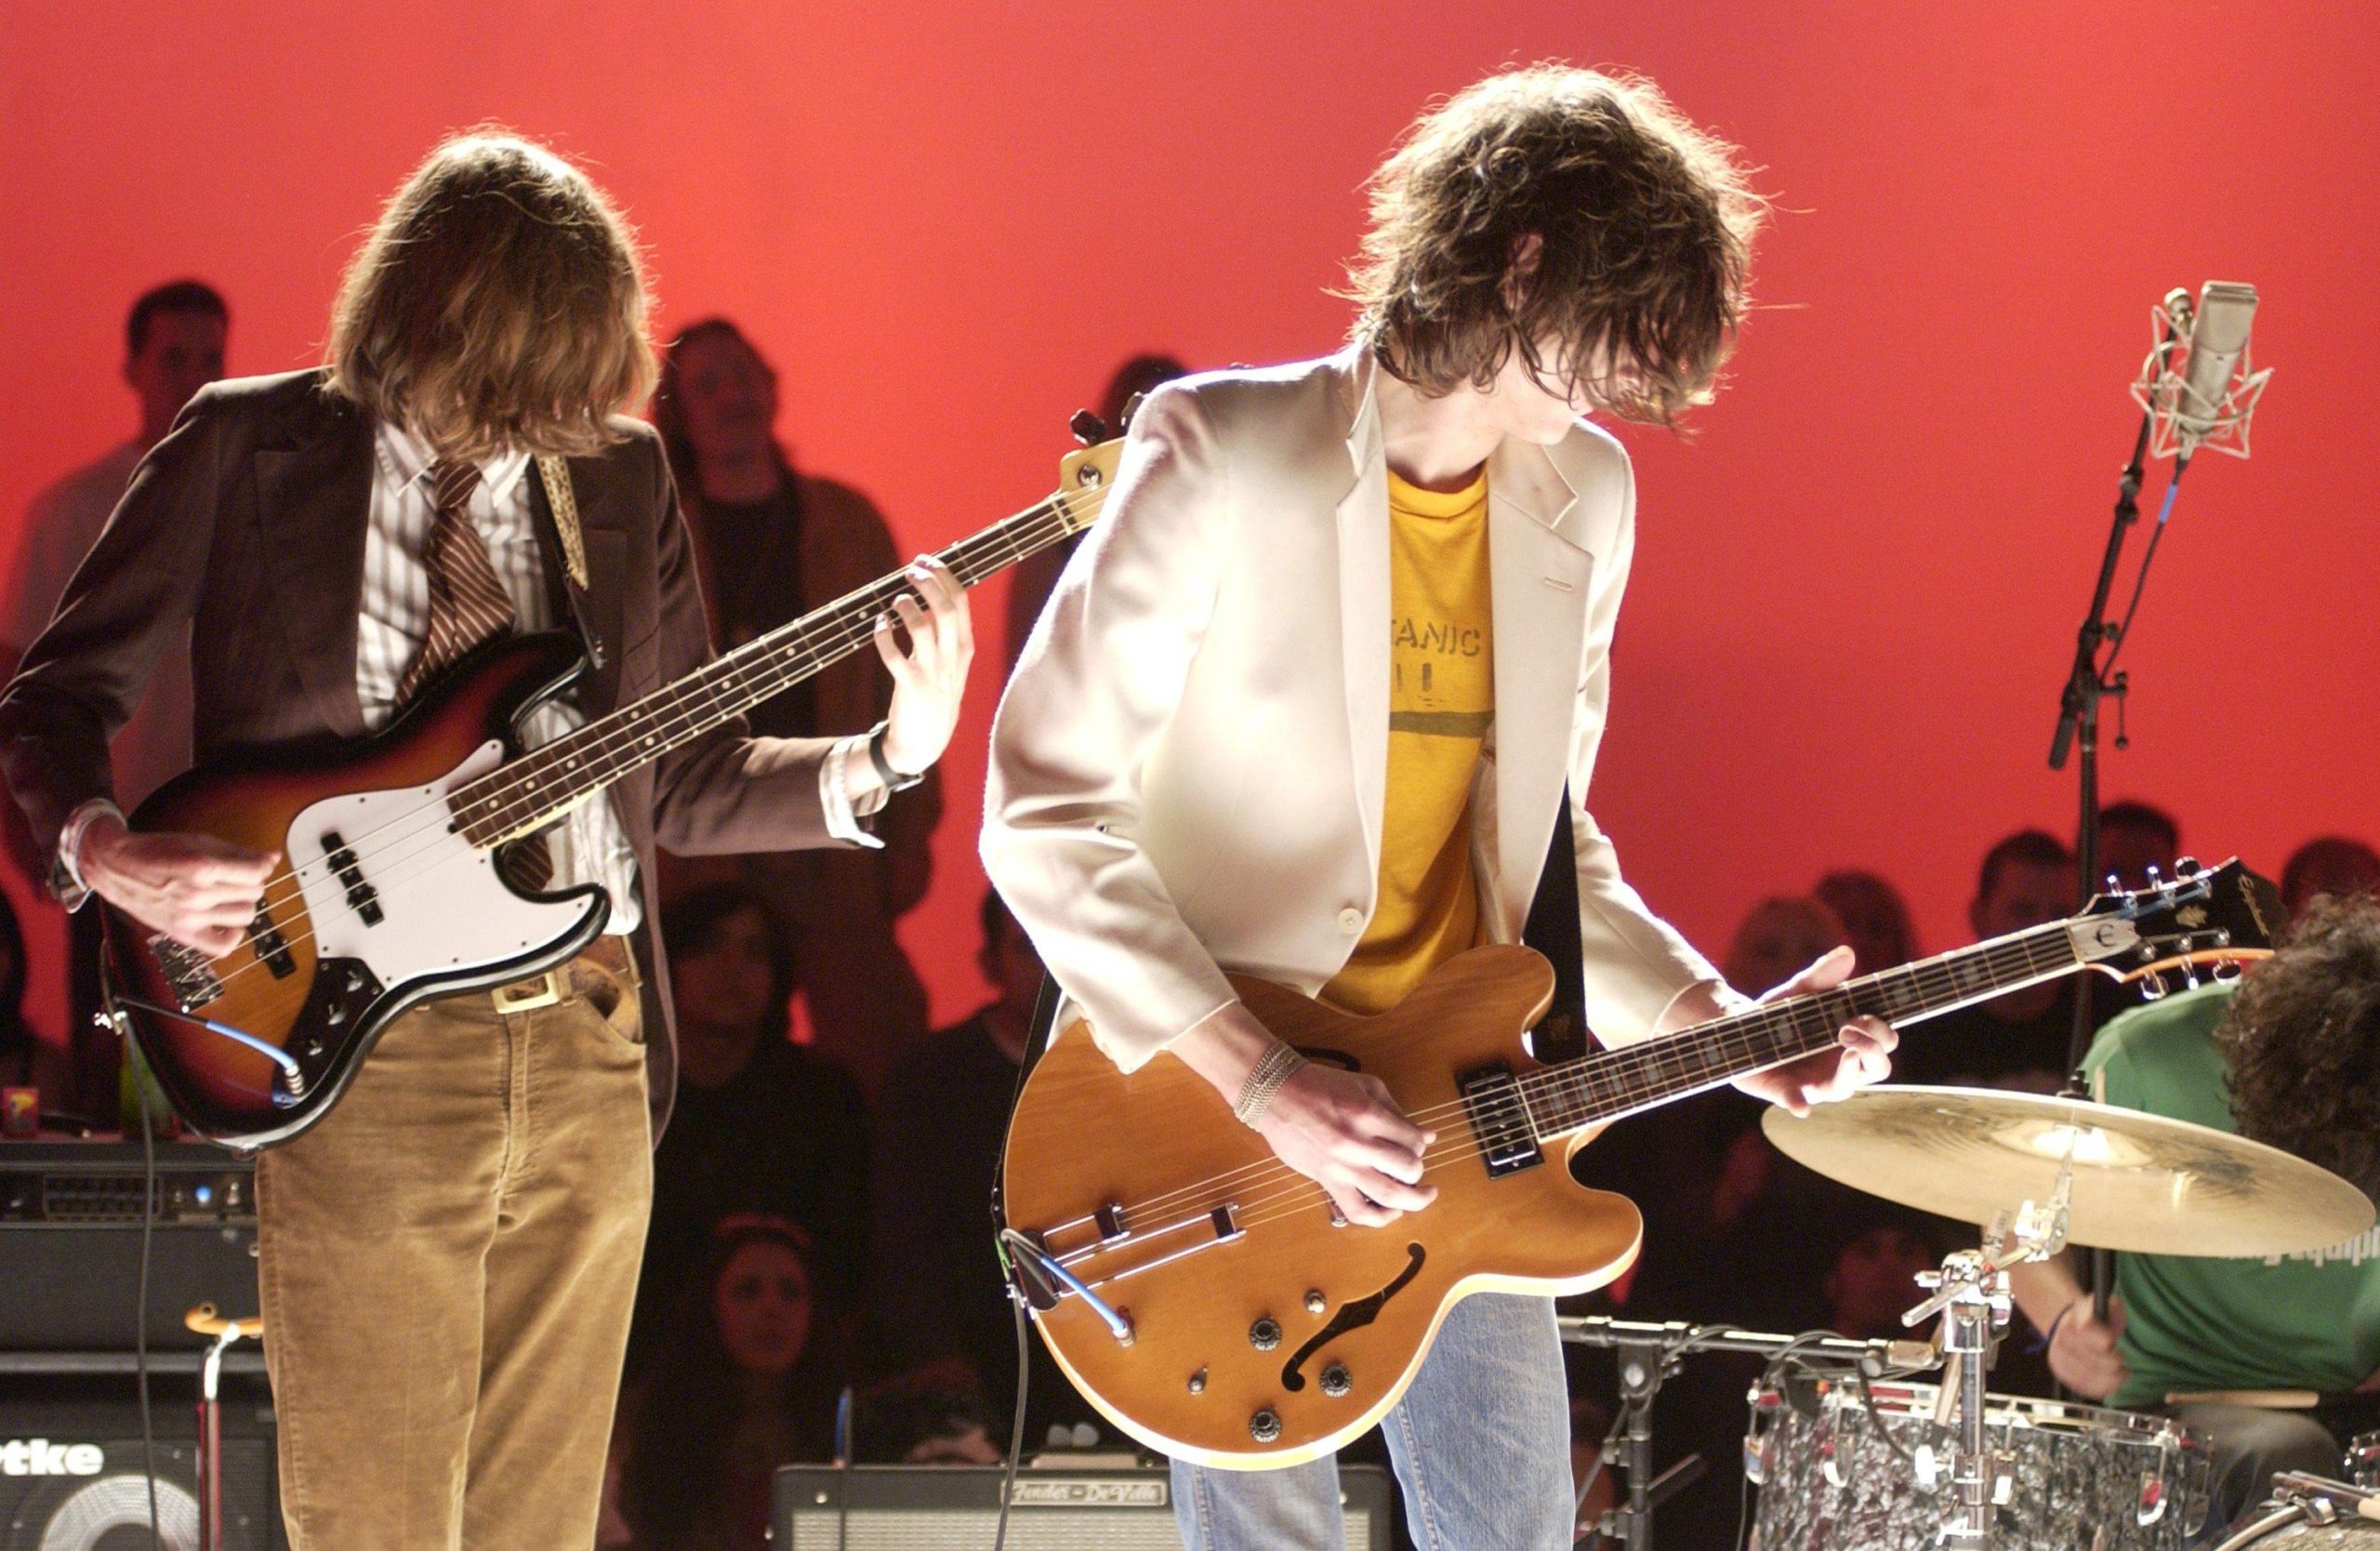 THE STROKES, A NEW MILLENNIUM OF STYLE